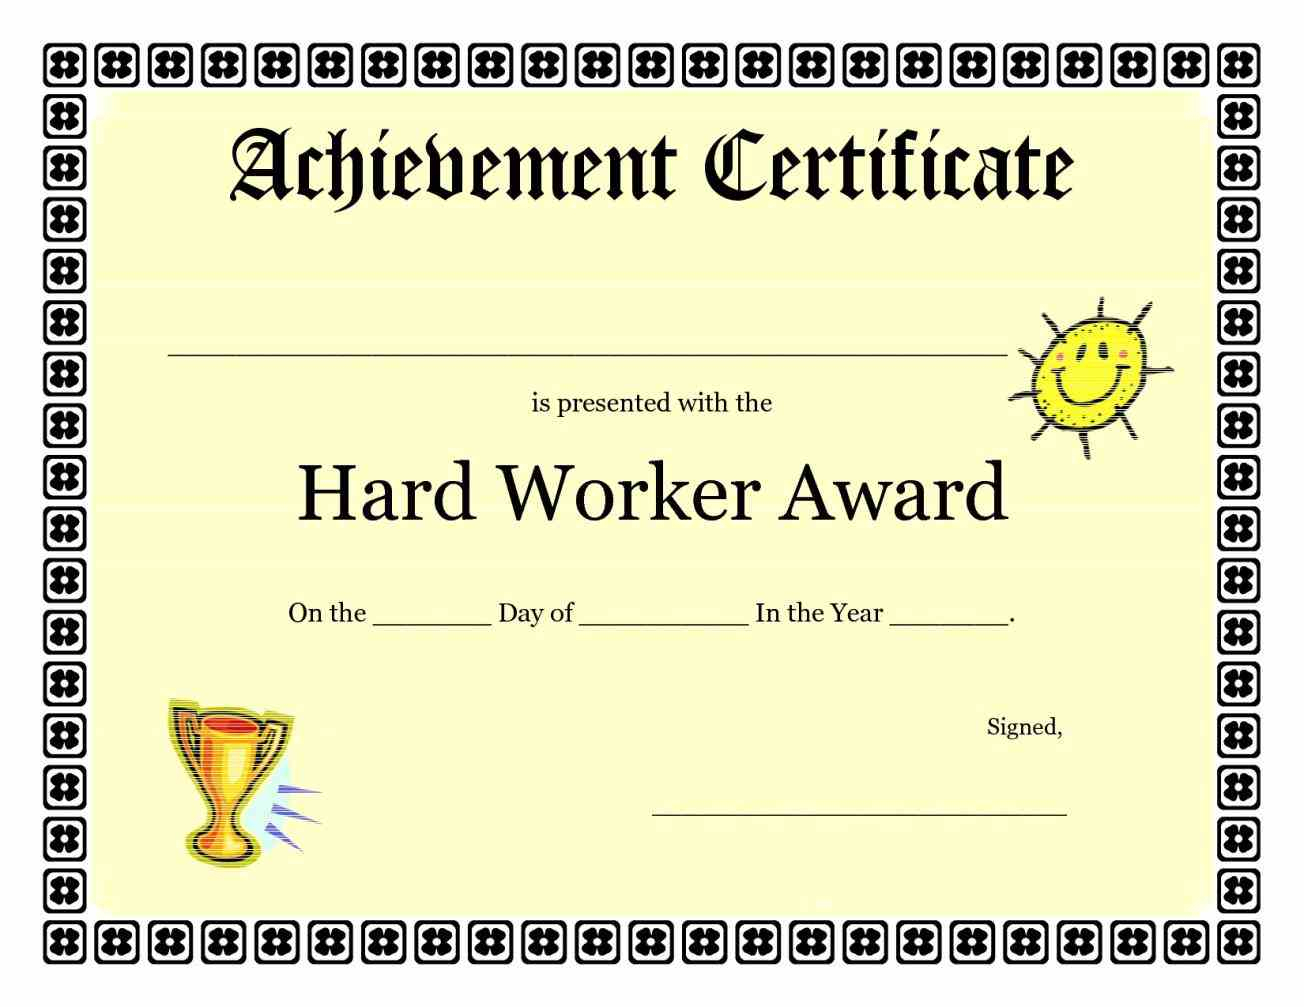 006 Certificate Of Achievement Word Template Ideas Doc General Free - Free Customizable Printable Certificates Of Achievement